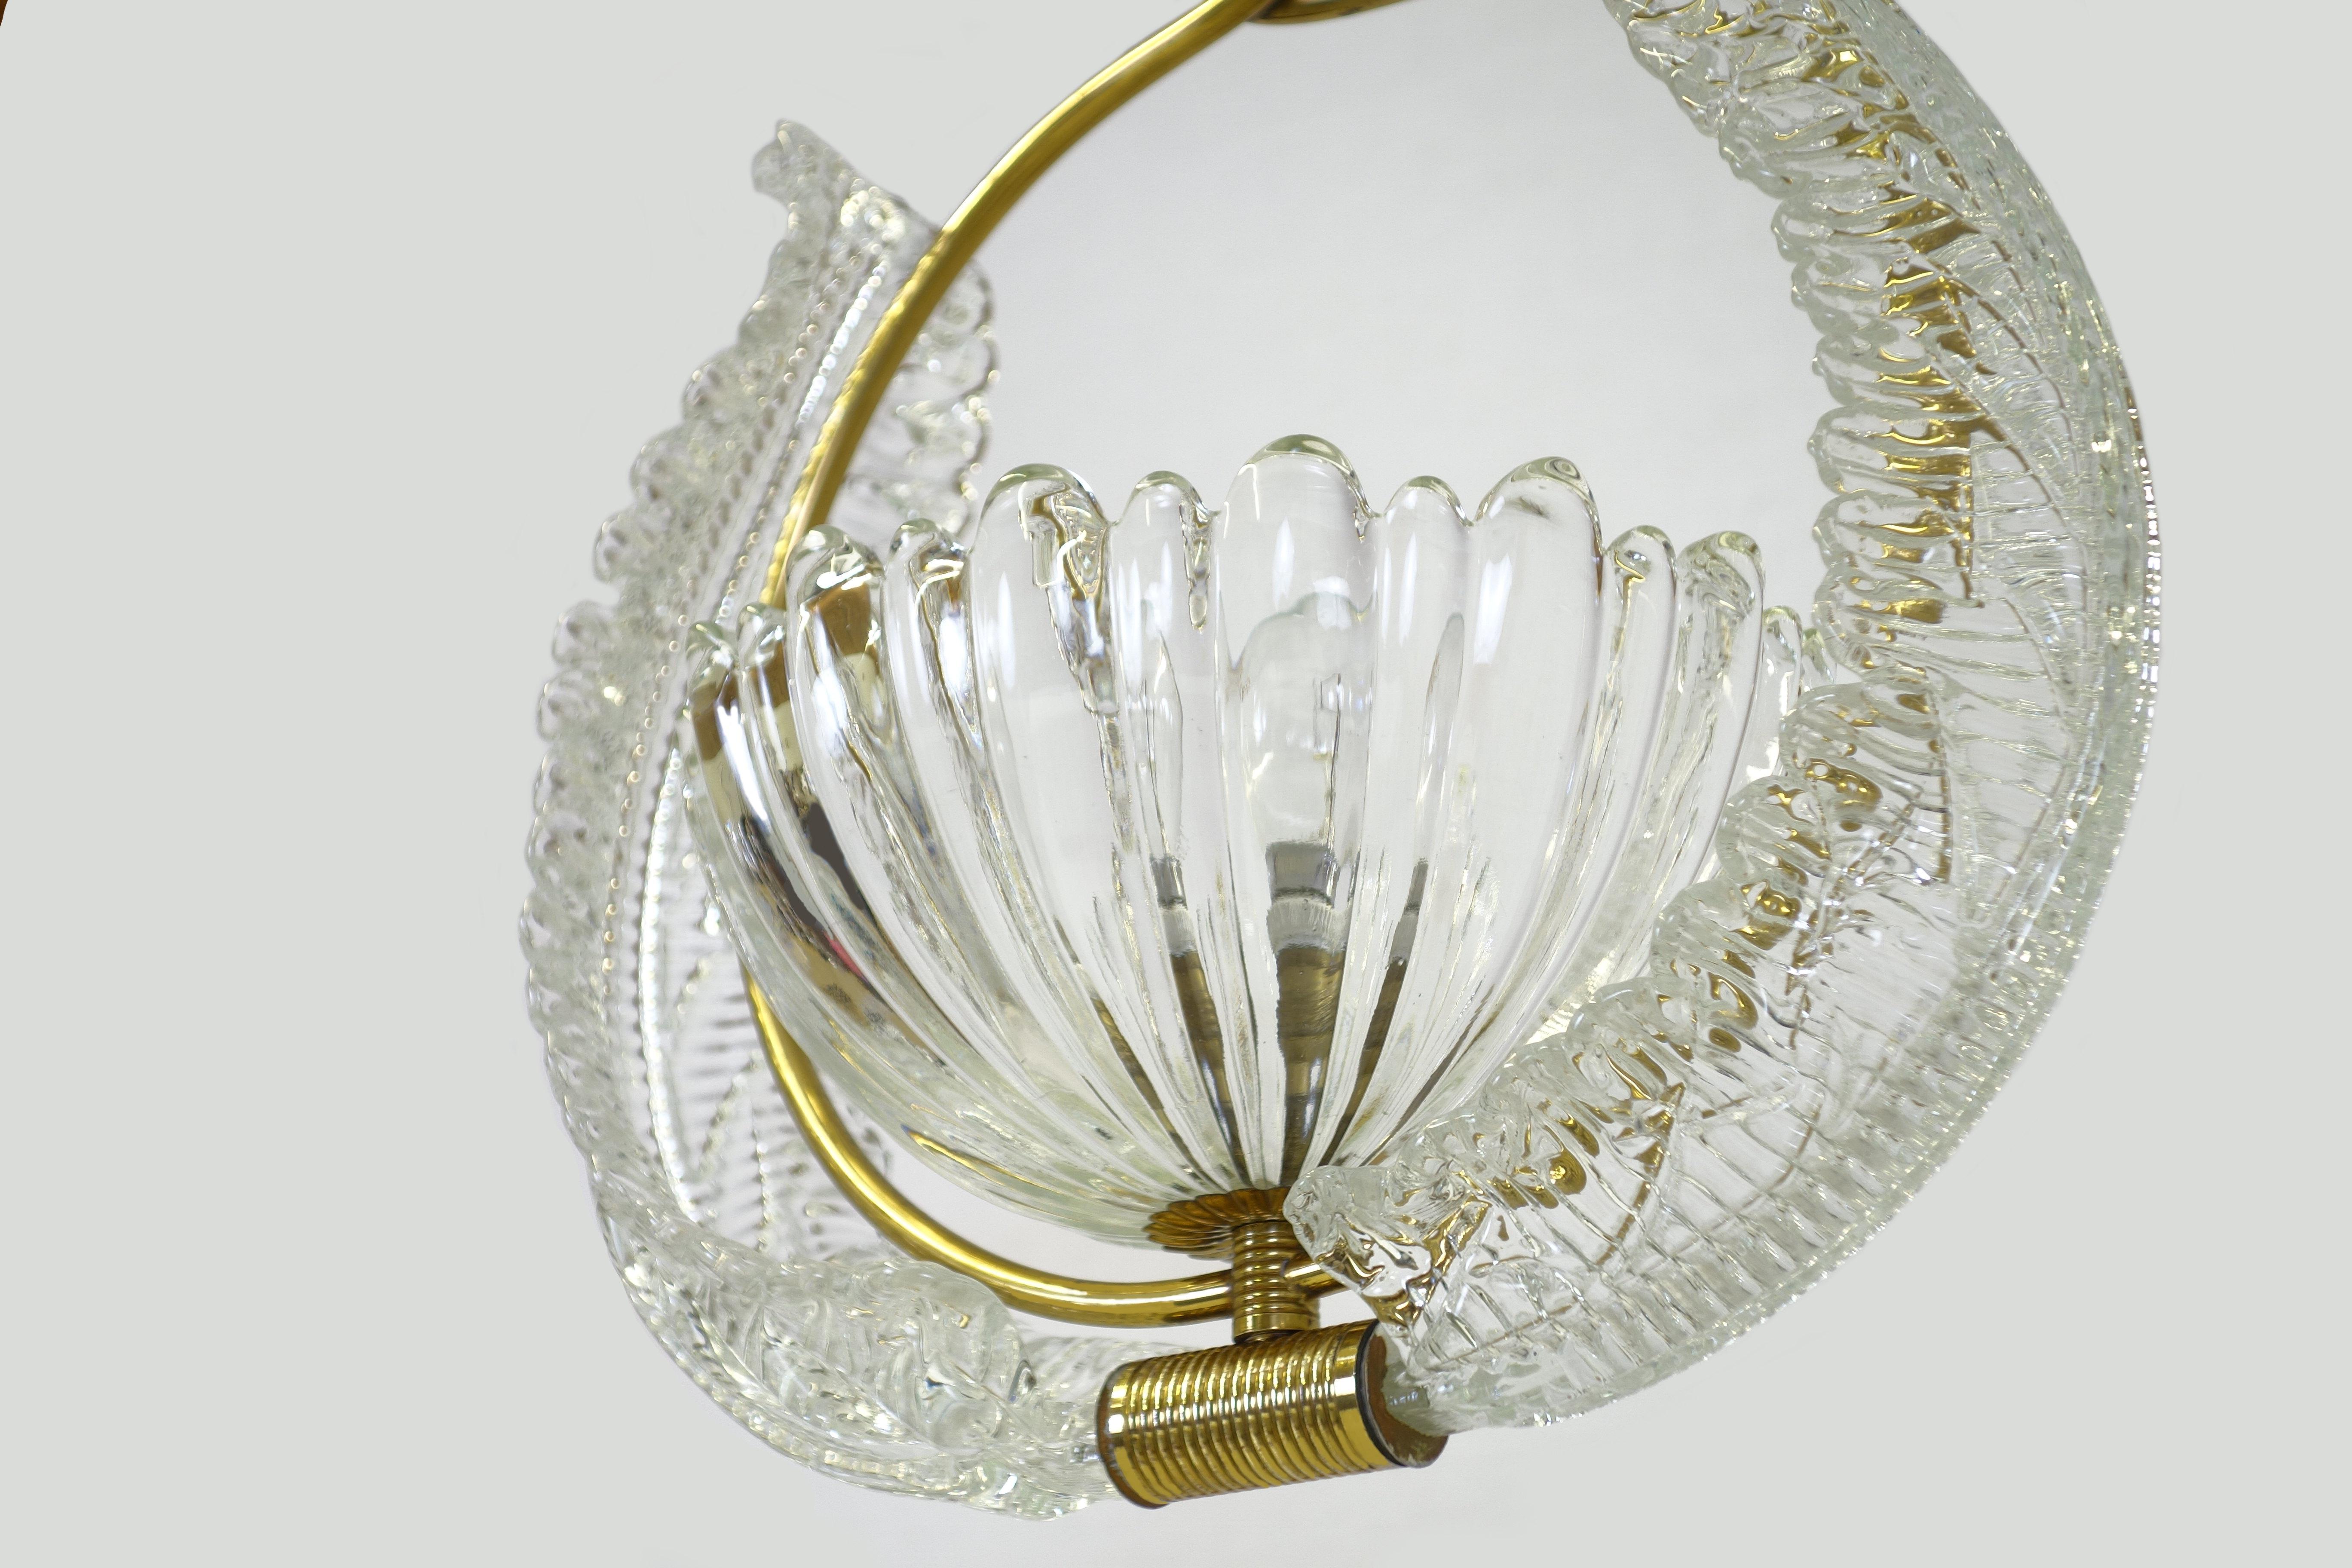 An enchanting pendant with glass leaves, a centered cup and rich detailwork, carried by delicate brass elements, designed by Barovier & Toso of Venice.